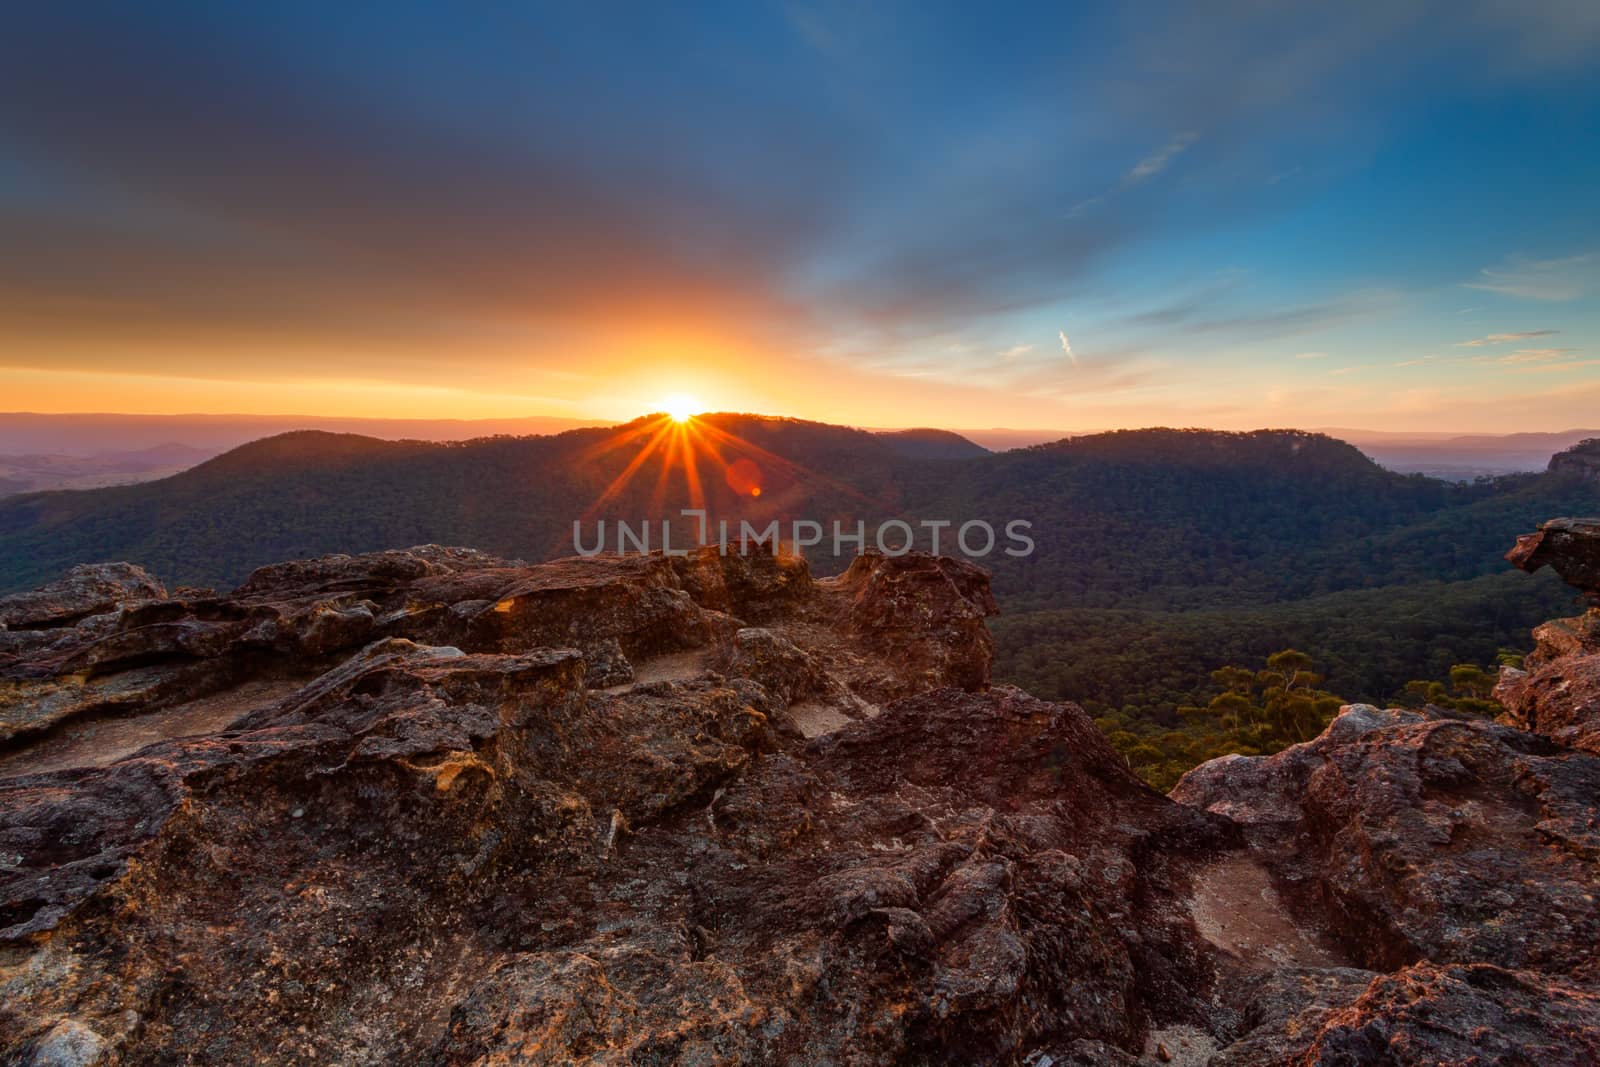 Sunburst as the sunset behind the Blue Mountains ranges lighting up the sky and clouds with warm  hues